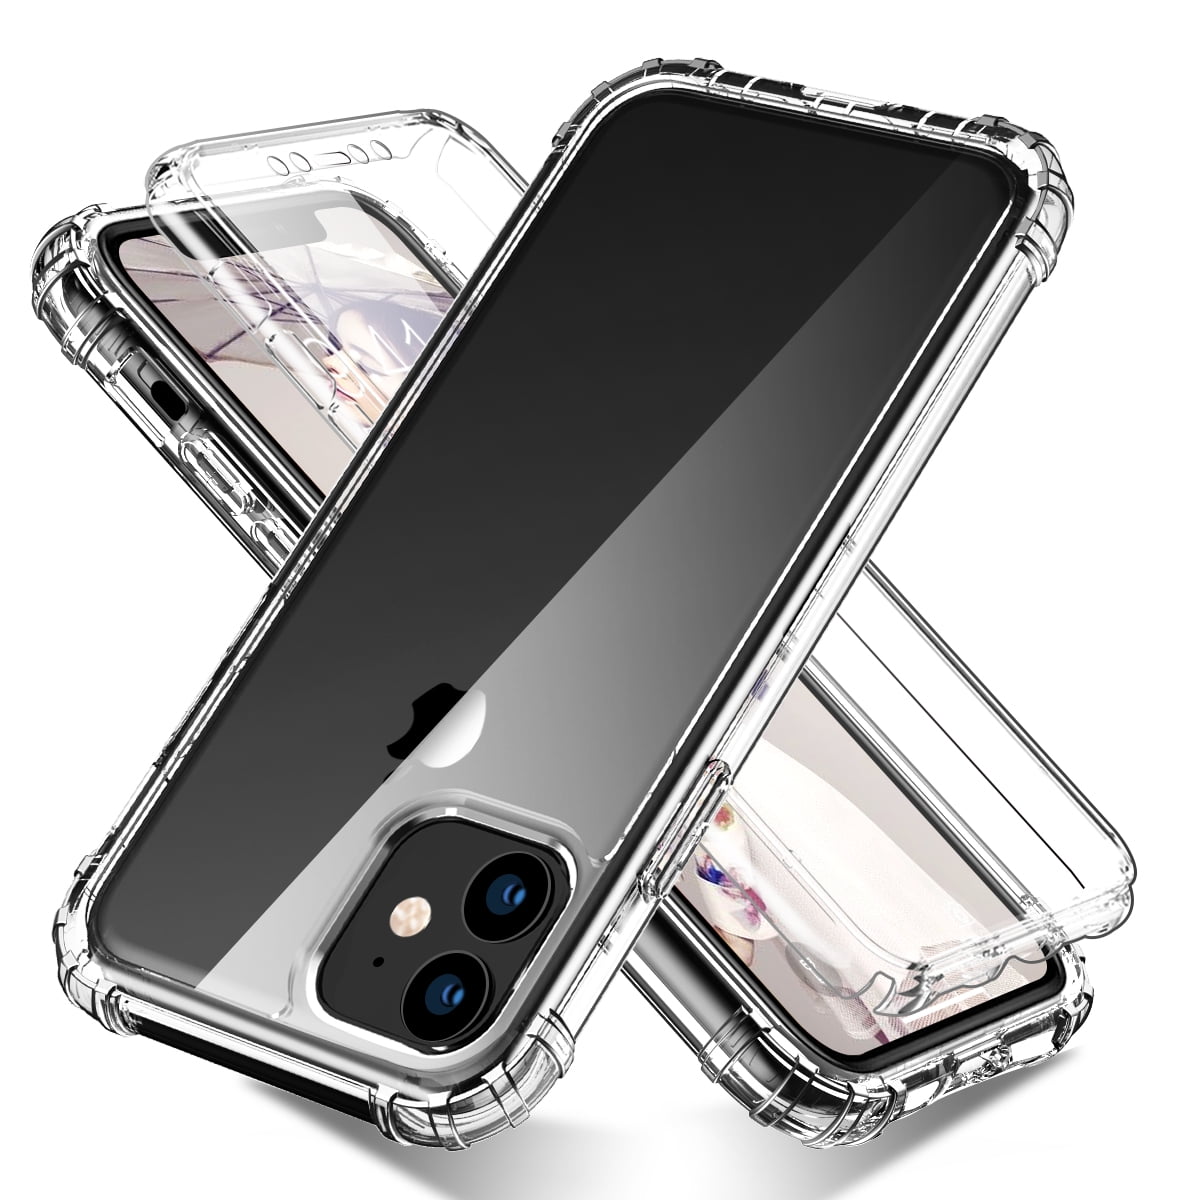 CellEver Clear Full Body Case for iPhone 11, Heavy Duty Protection with  Anti-Slip TPU Bumper and [2 Tempered 9H Glass Screen Protectors] Shockproof